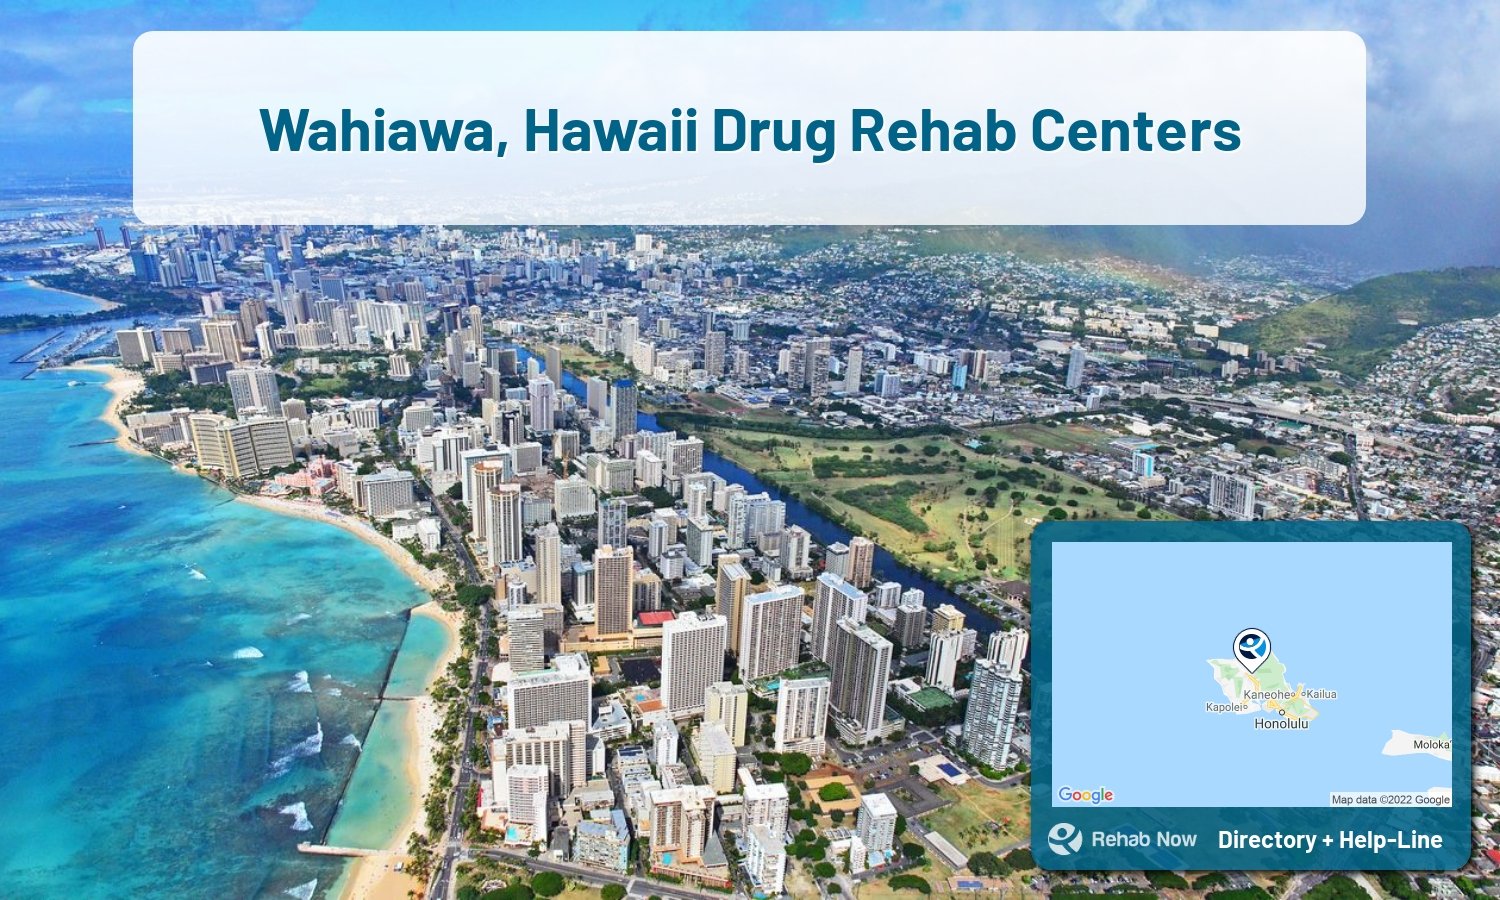 Ready to pick a rehab center in Wahiawa? Get off alcohol, opiates, and other drugs, by selecting top drug rehab centers in Hawaii